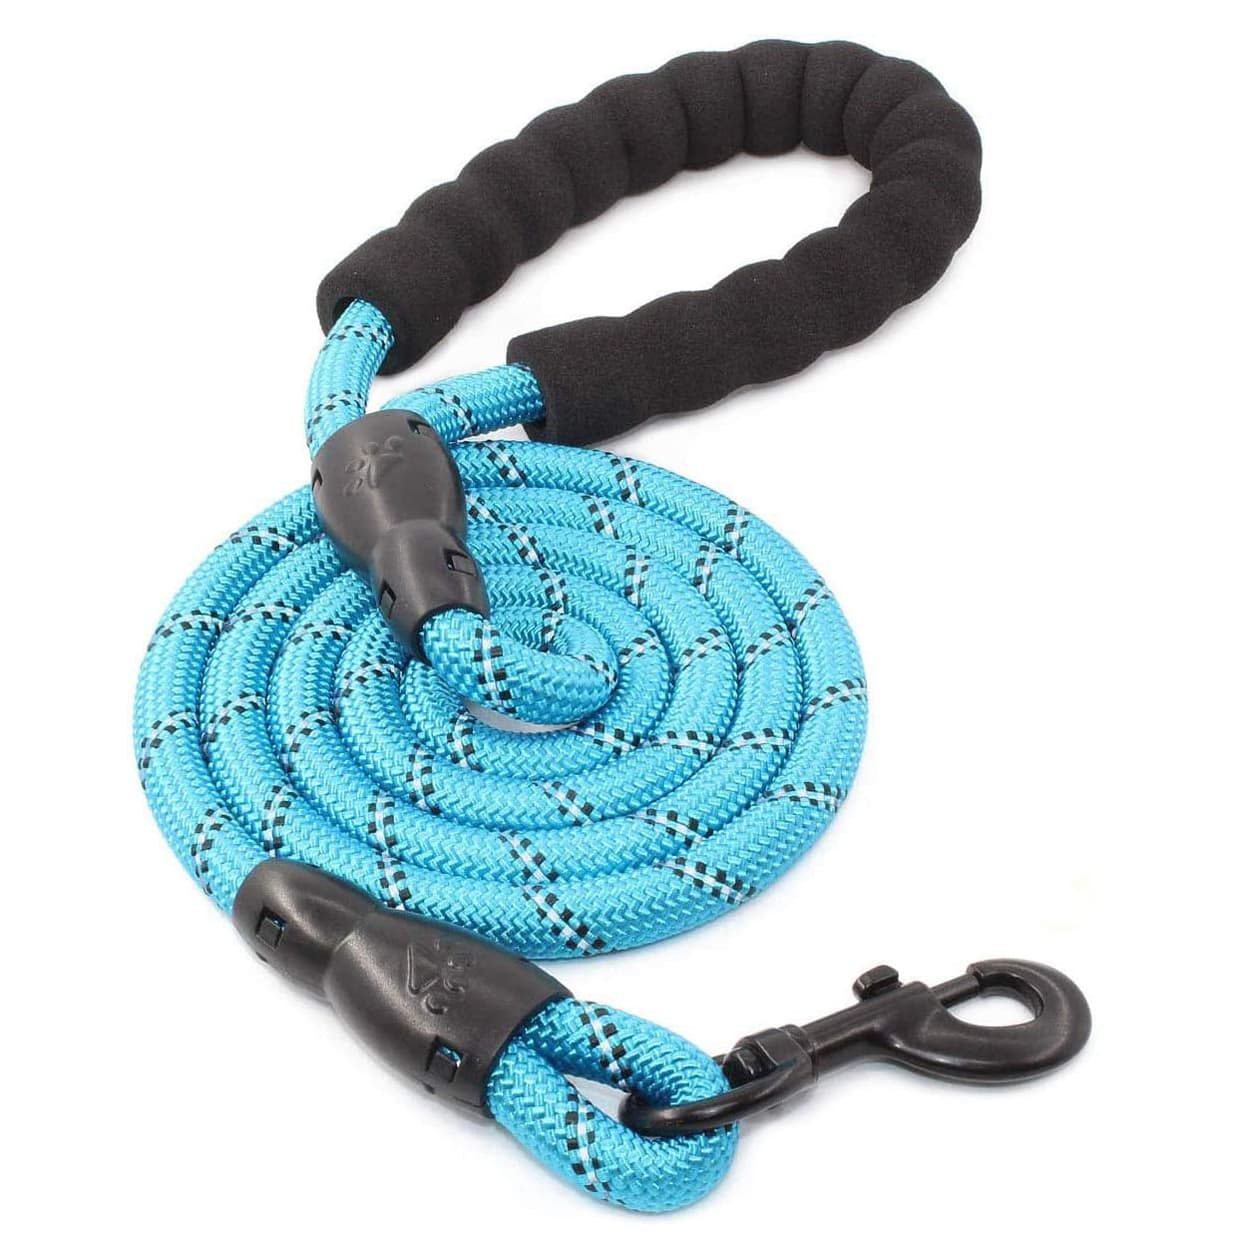 Dog Leash with Padded Handle